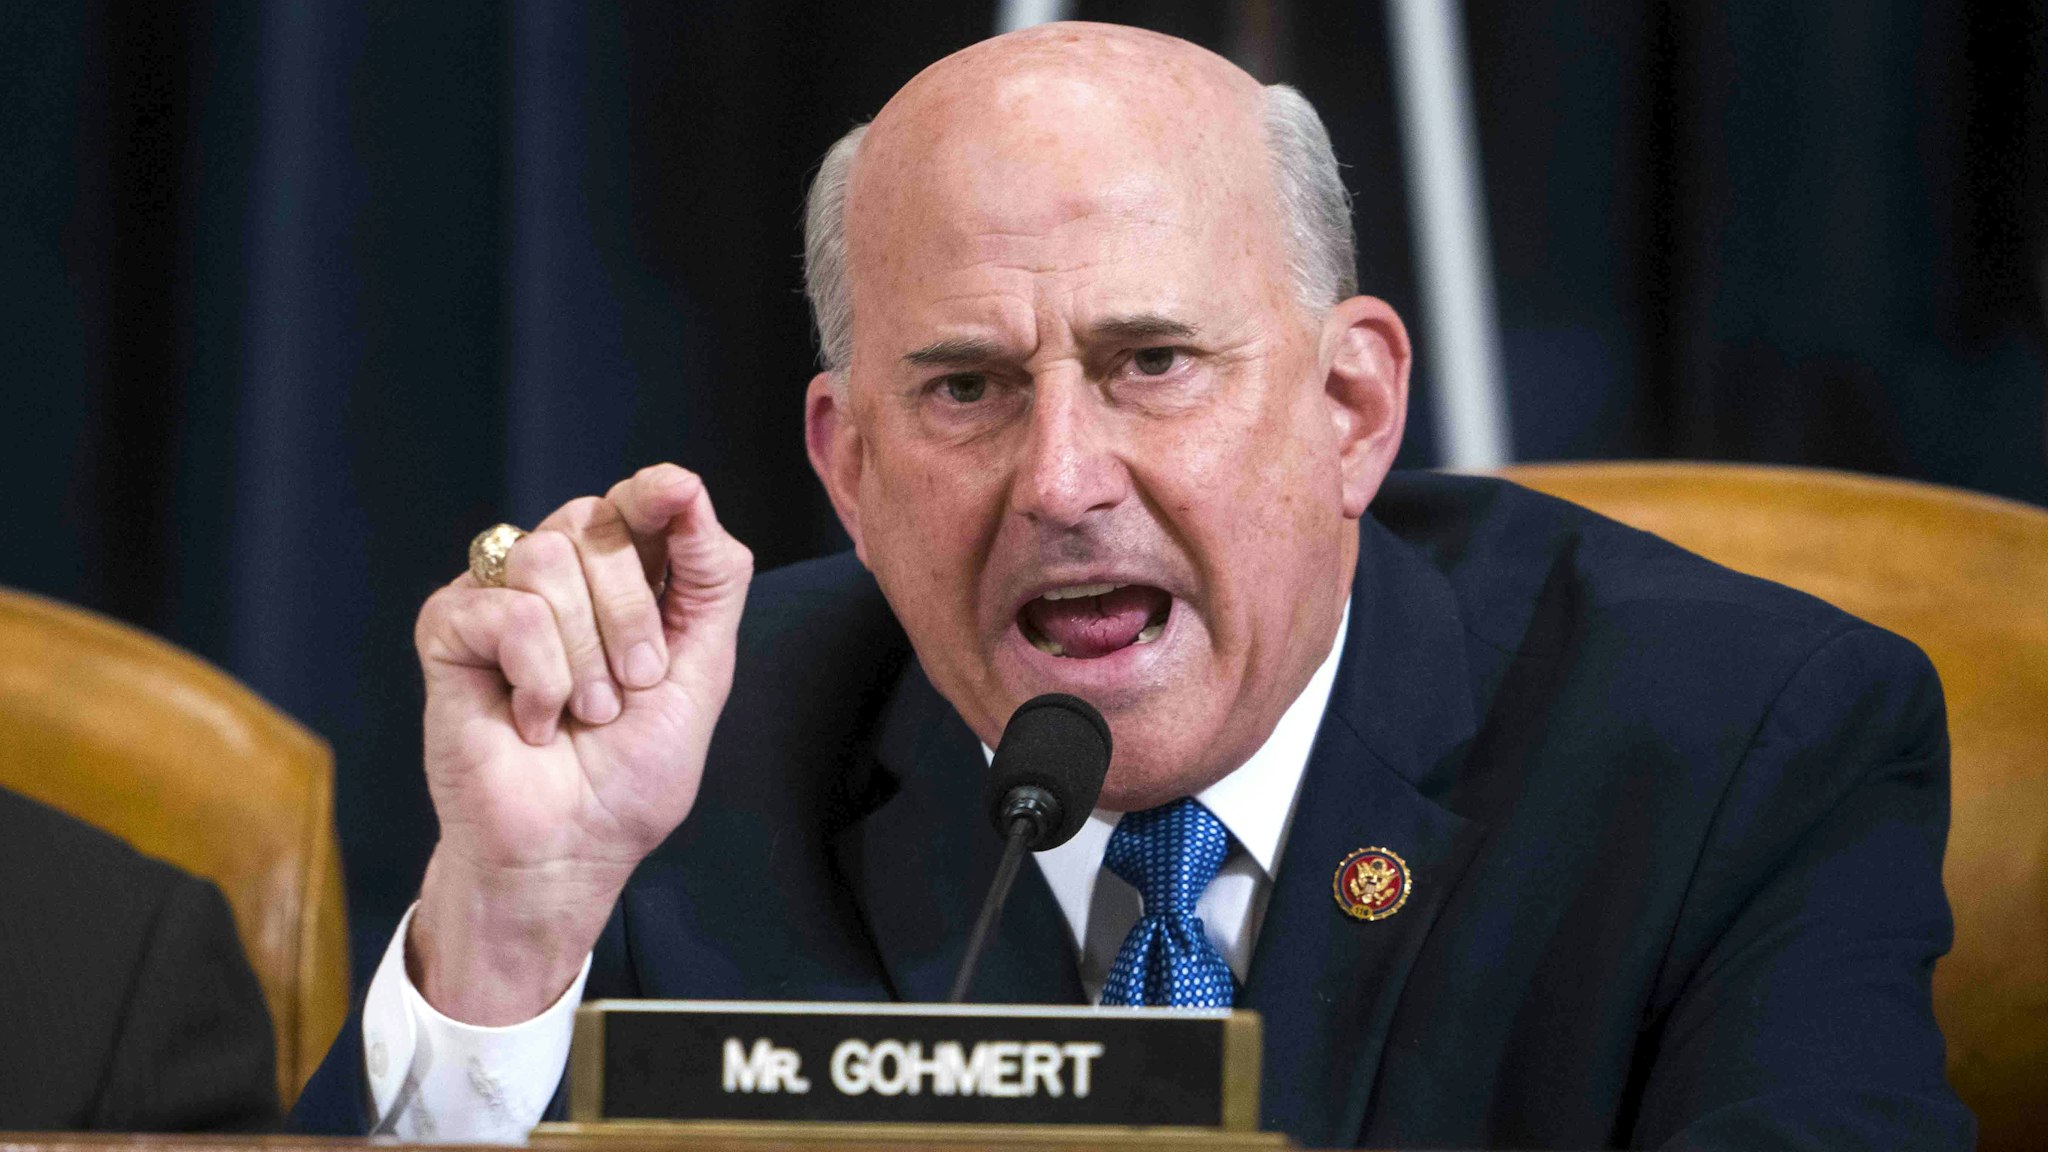 WASHINGTON, DC – DECEMBER 09: Rep. Louie Gohmert (R-TX) questions Intelligence Committee Minority Counsel Stephen Castor and Intelligence Committee Majority Counsel Daniel Goldman during the House impeachment inquiry hearings in the Longworth House Office Building on Capitol Hill December 9, 2019 in Washington, DC. The hearing is being held for the Judiciary Committee to formally receive evidence in the impeachment inquiry of President Donald Trump, whom Democrats say held back military aid for Ukraine while demanding they investigate his political rivals. The White House declared it would not participate in the hearing.